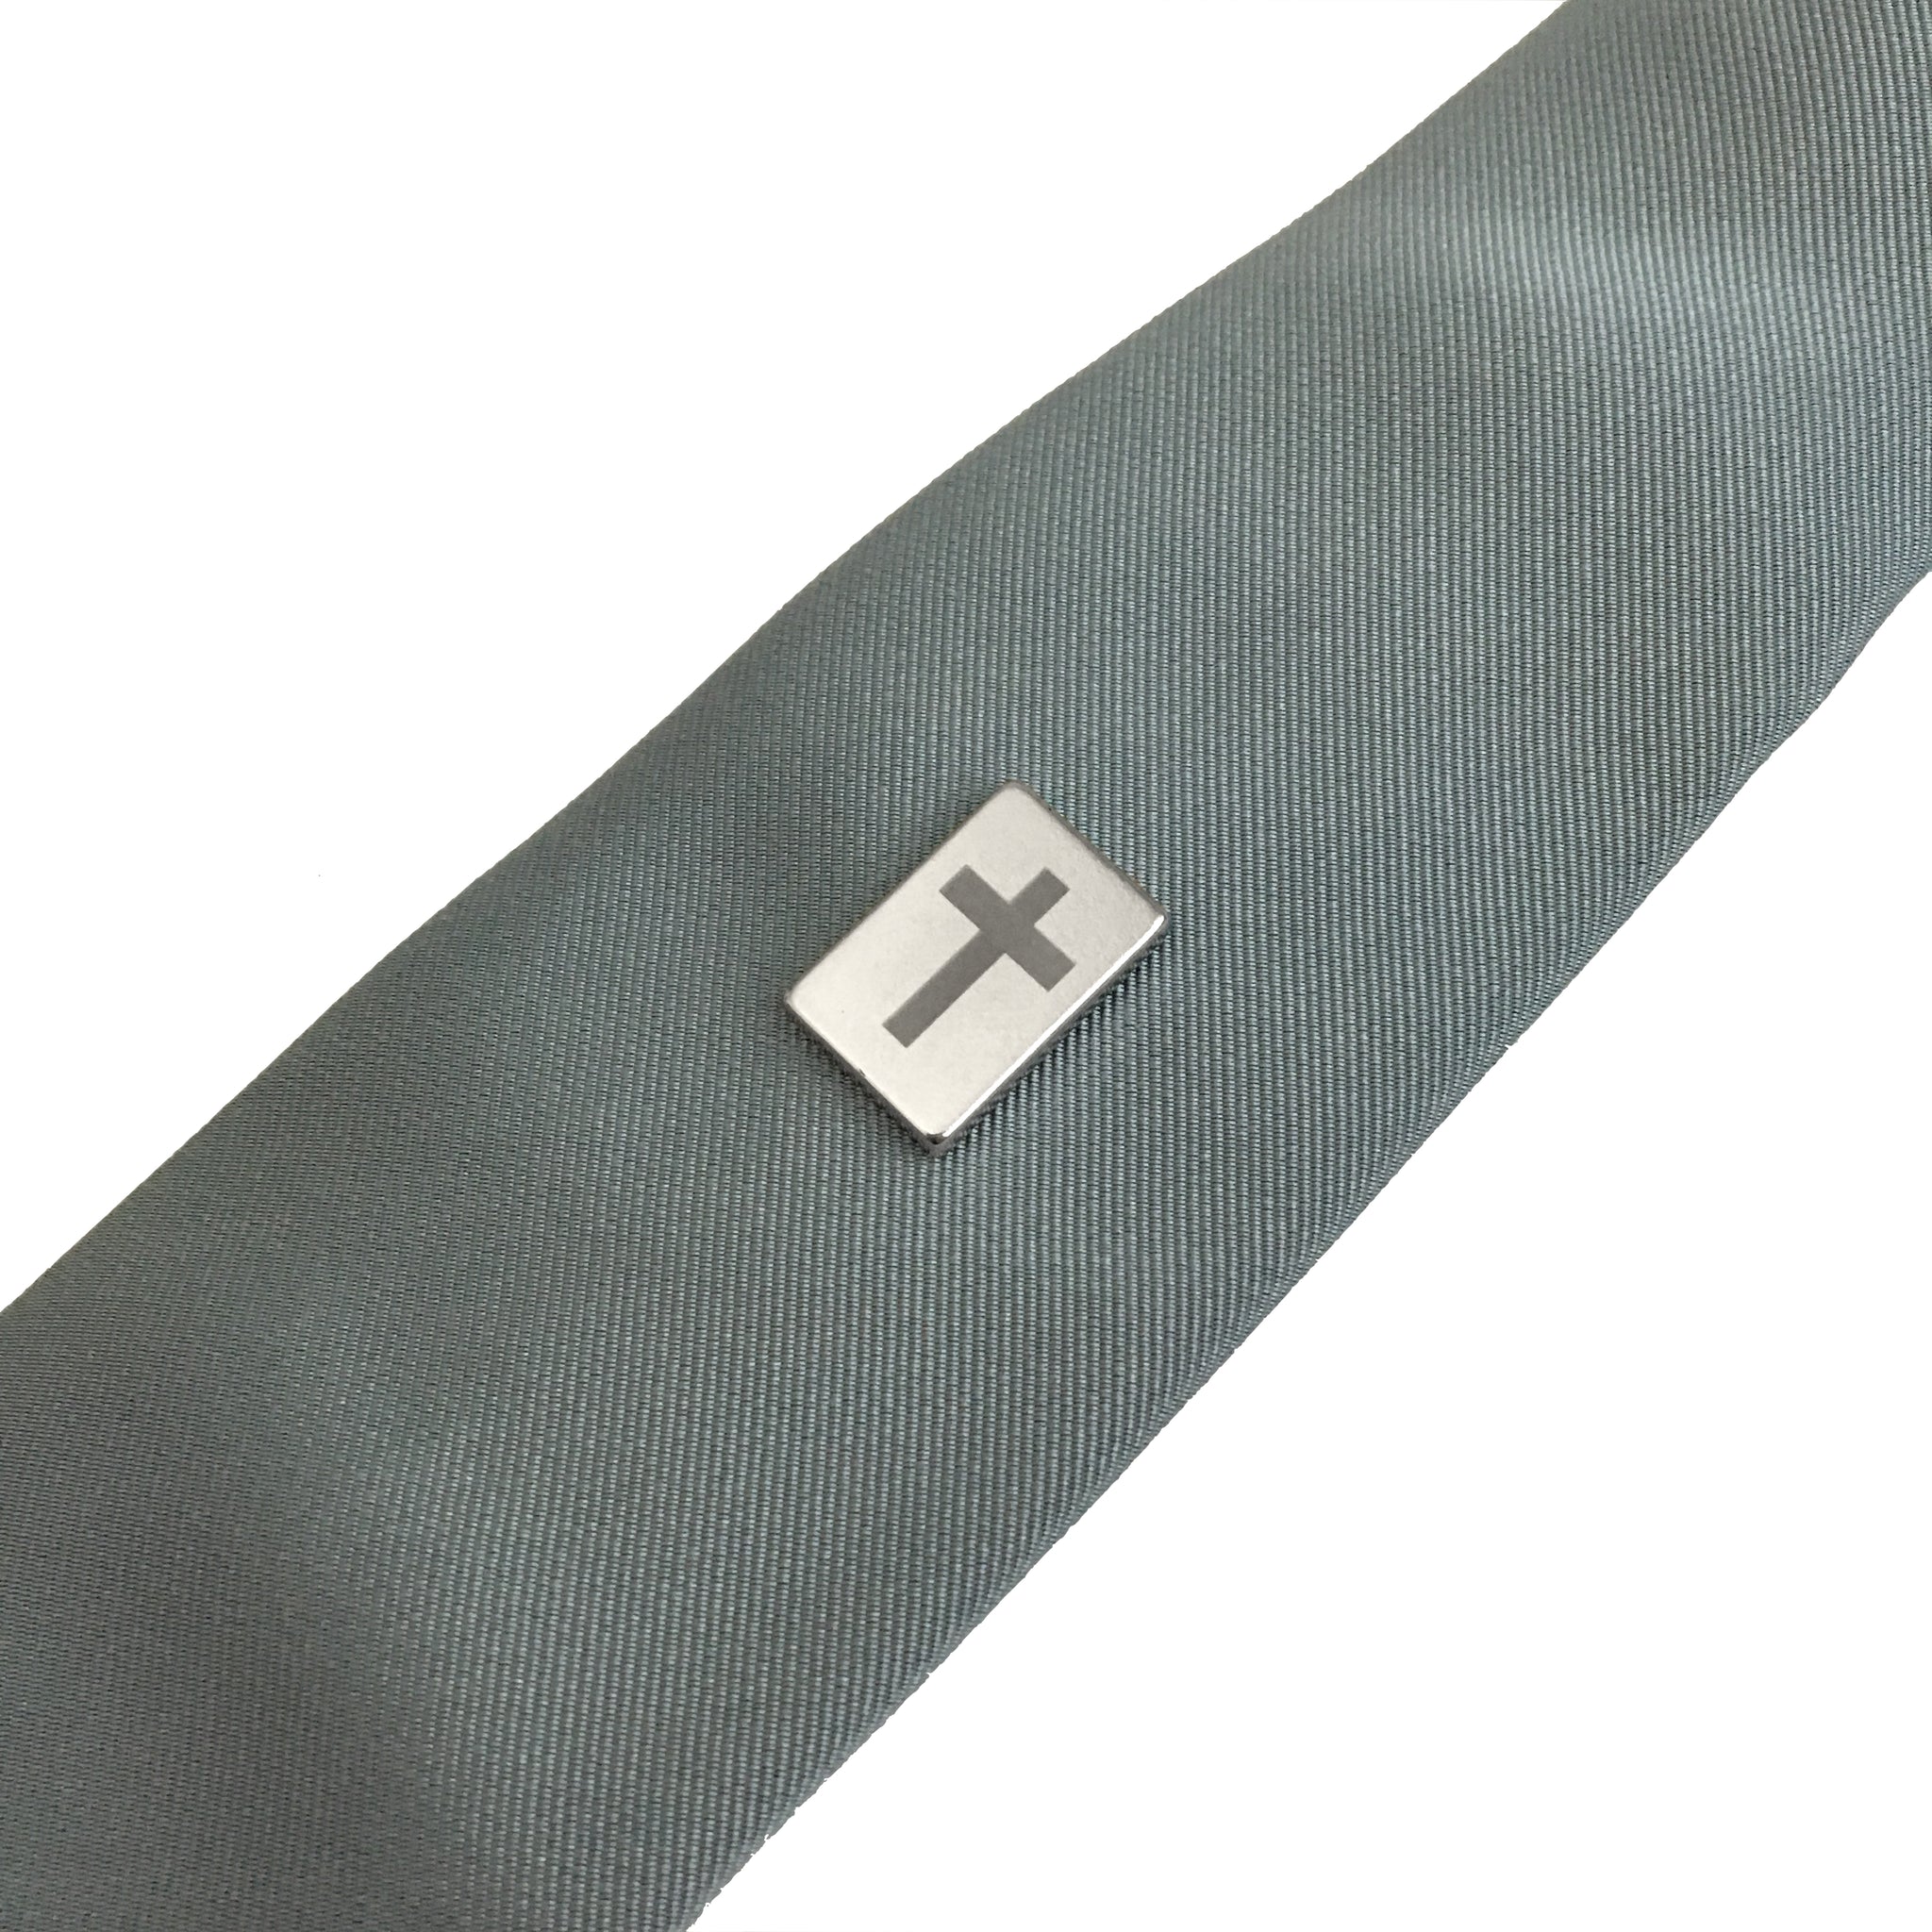  Tie Mags™ The Silver Key - Magnetic Tie Clip